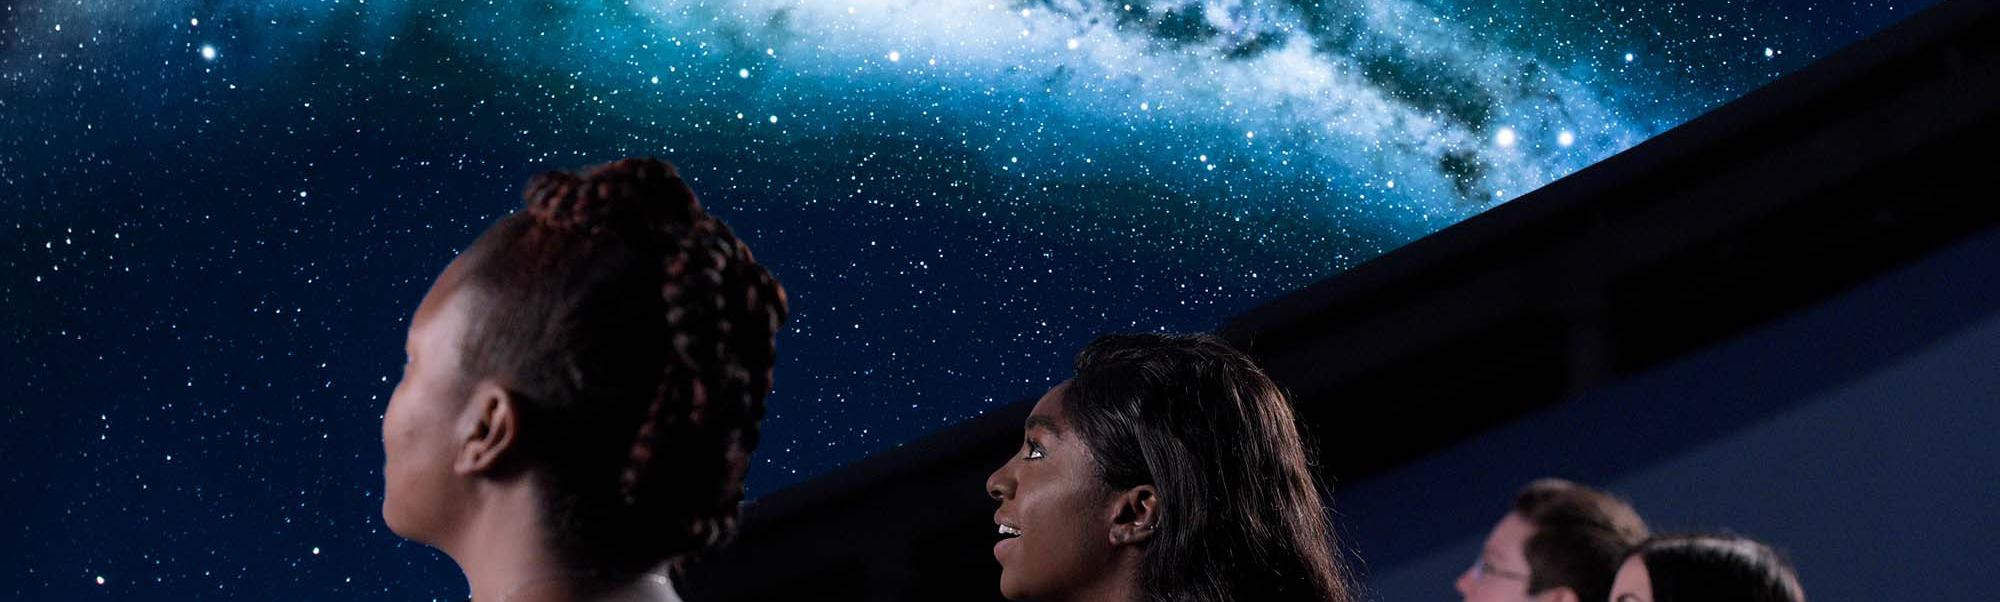 Close up image of four people shown from a back/side profile as they look up to watch a projection of the Milky Way in a planetarium dome